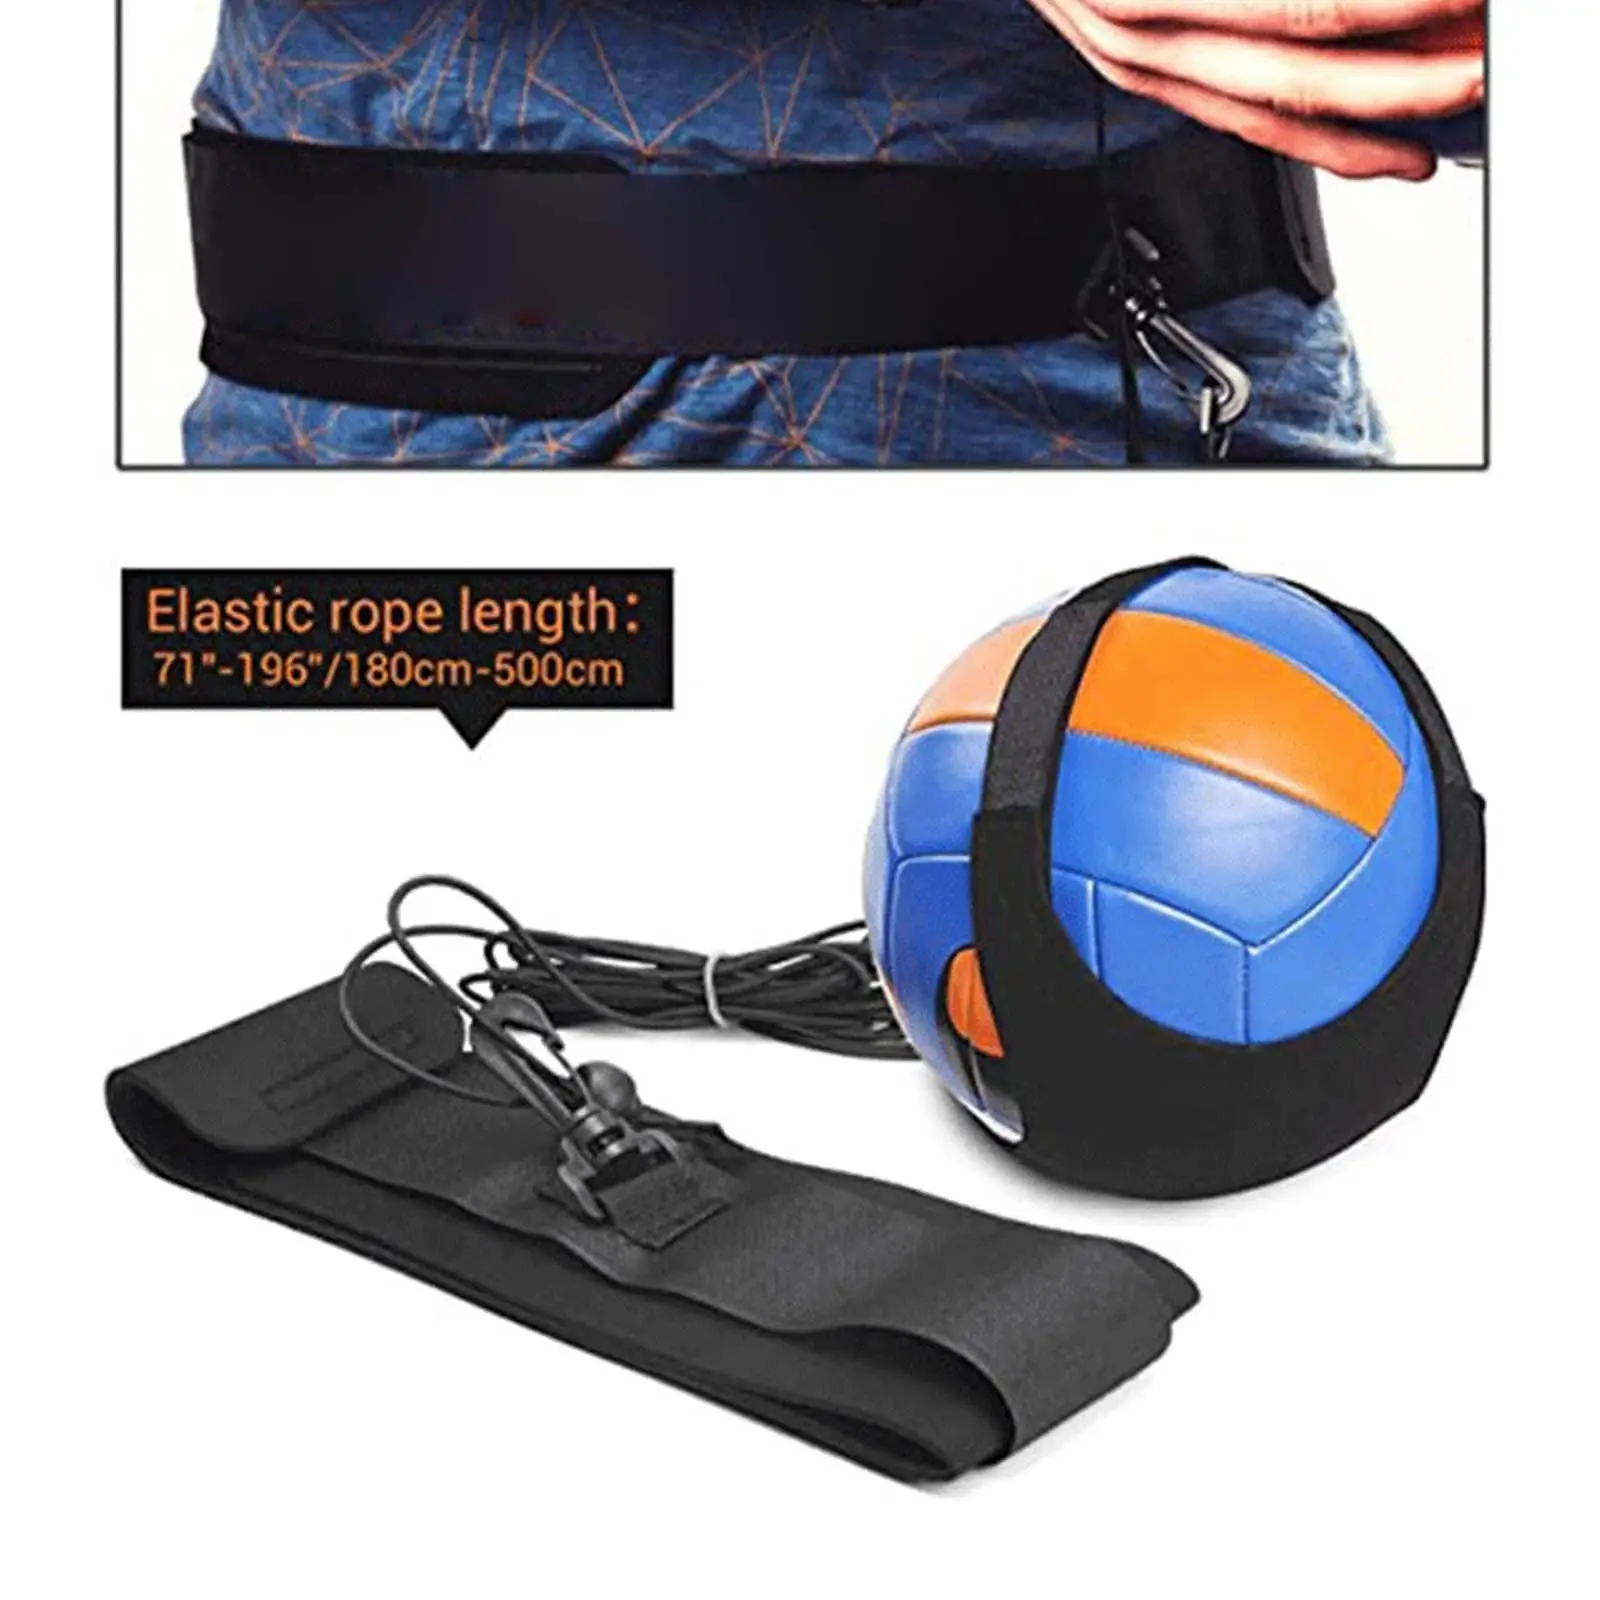 Volleyball Training Equipment Aid Elastic Cord Solo Practice Trainer for Beginners